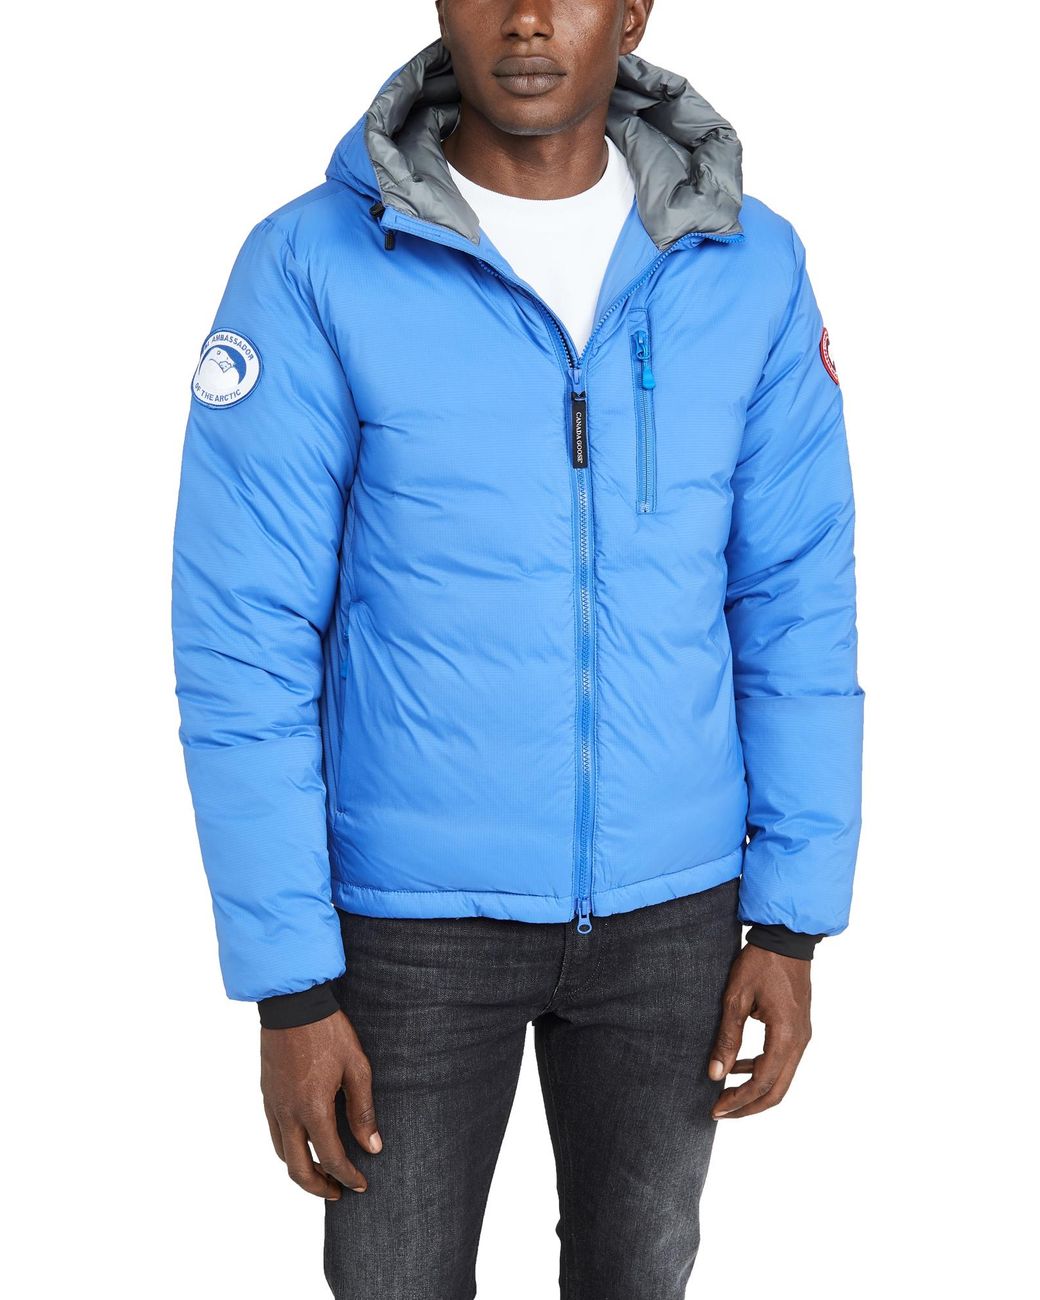 Canada Goose Goose Pbi Lodge Hoody in Blue for Men - Save 4% - Lyst